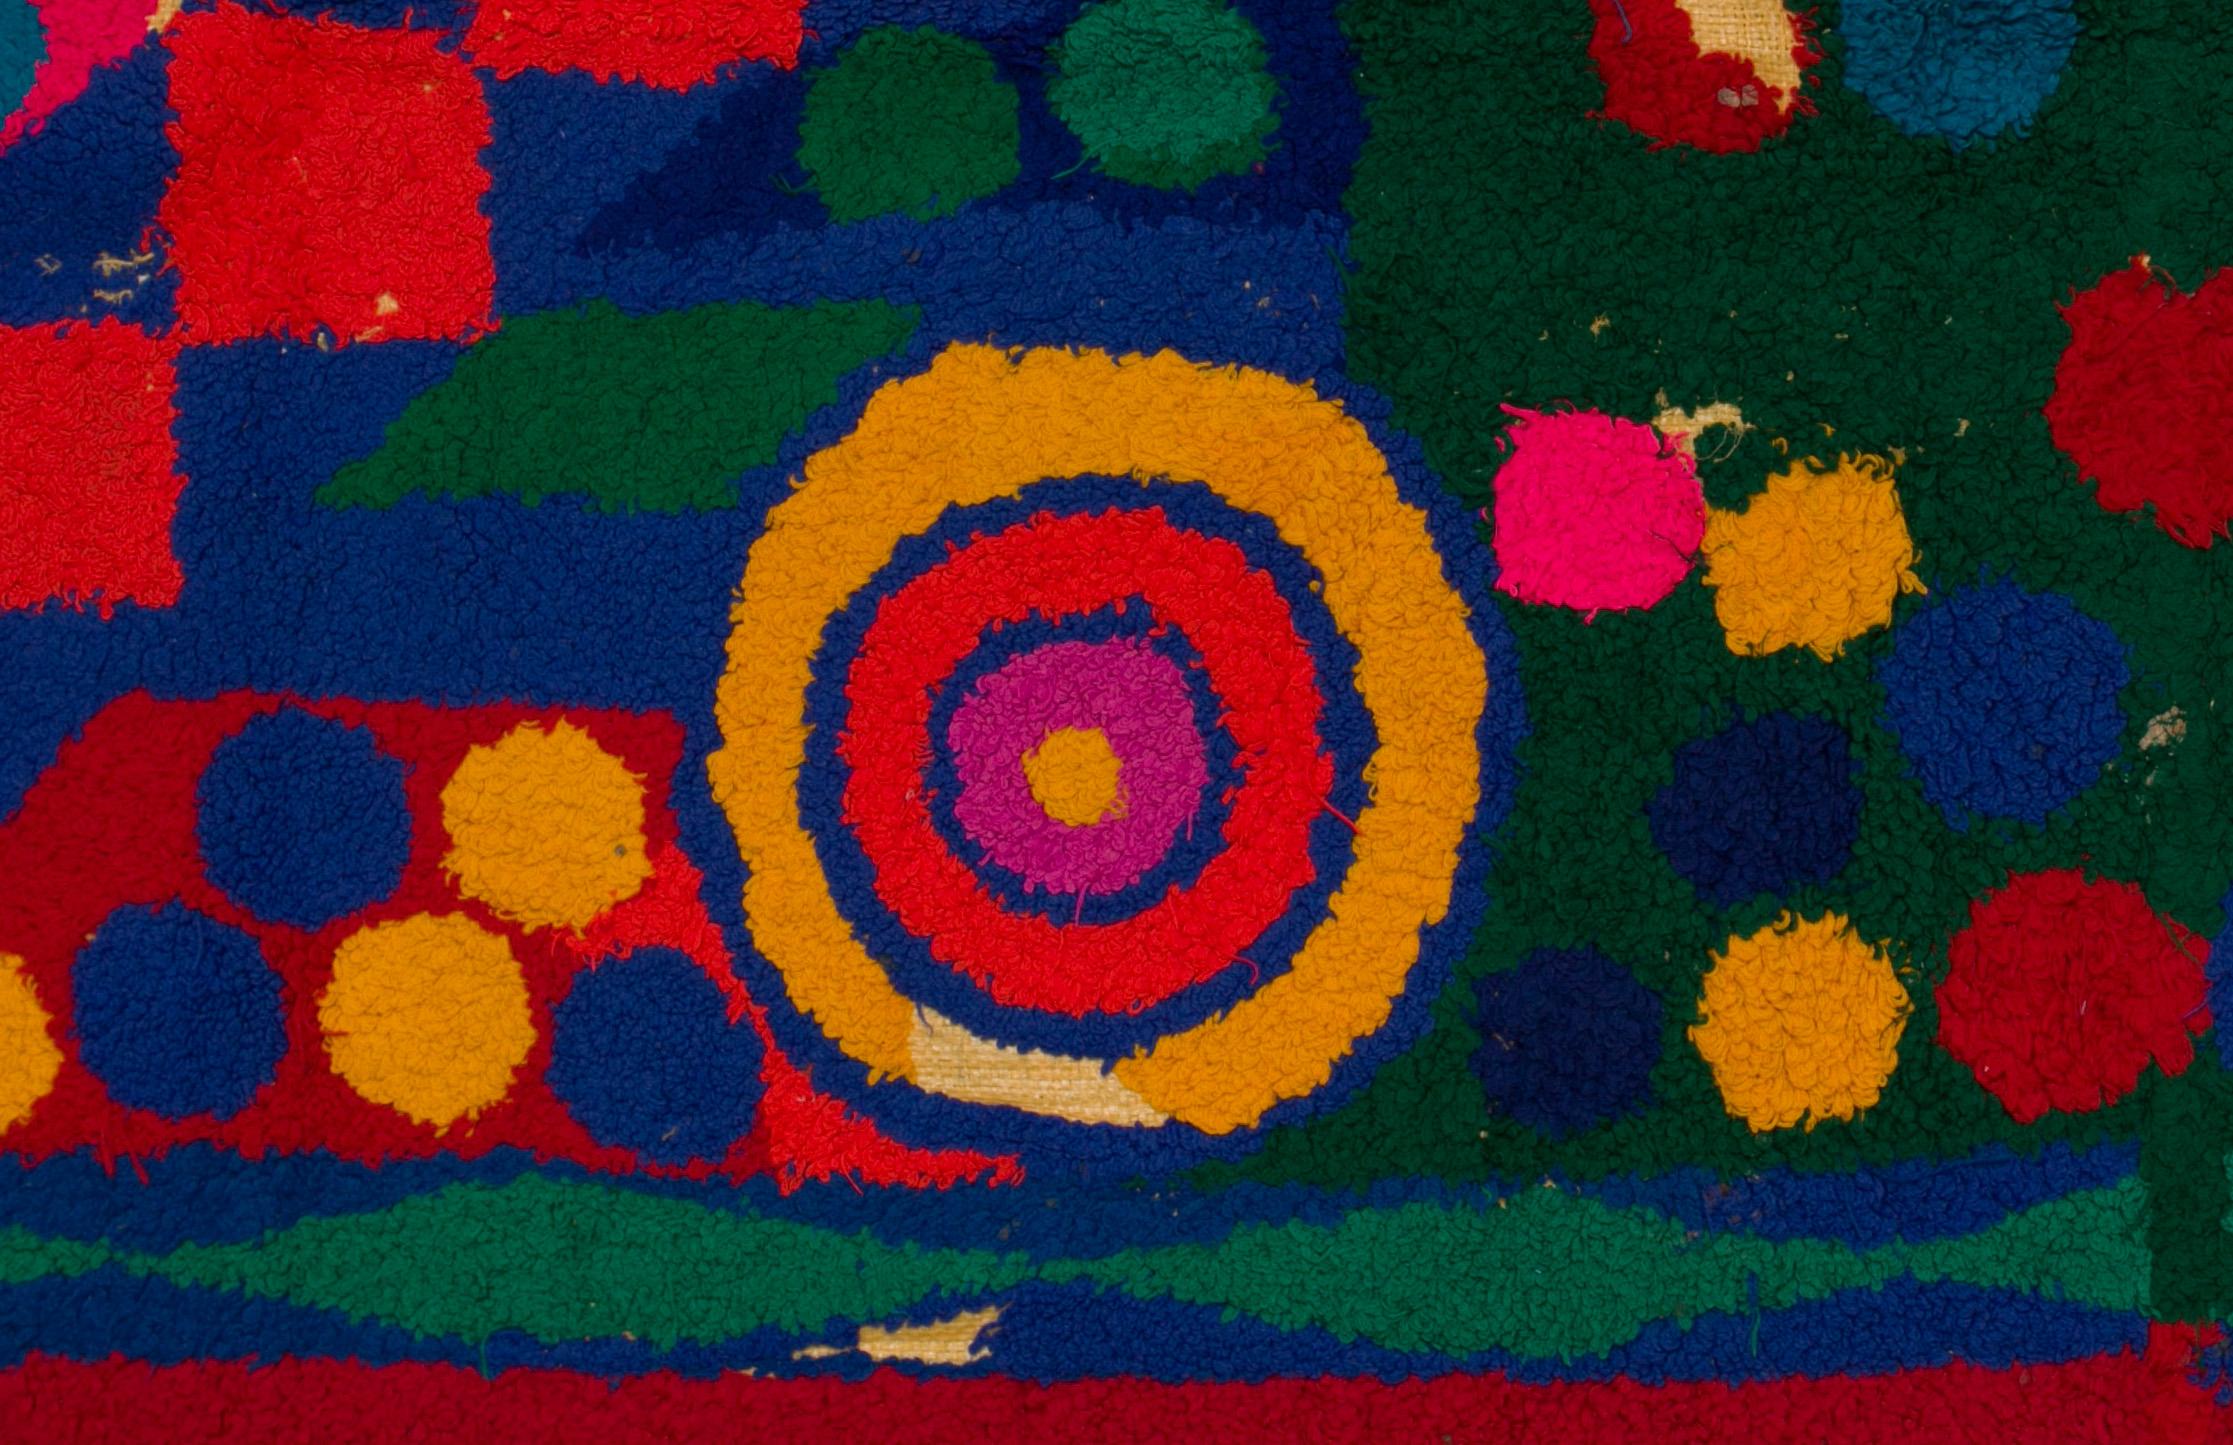 Extra large and unique, this tapestry was made by Berber women from the Atlas Mountains.
Made from woolen ends and other threads, embroidered on wasted plastic bags of cereals, this unique and vintage work is the demonstration of the secret